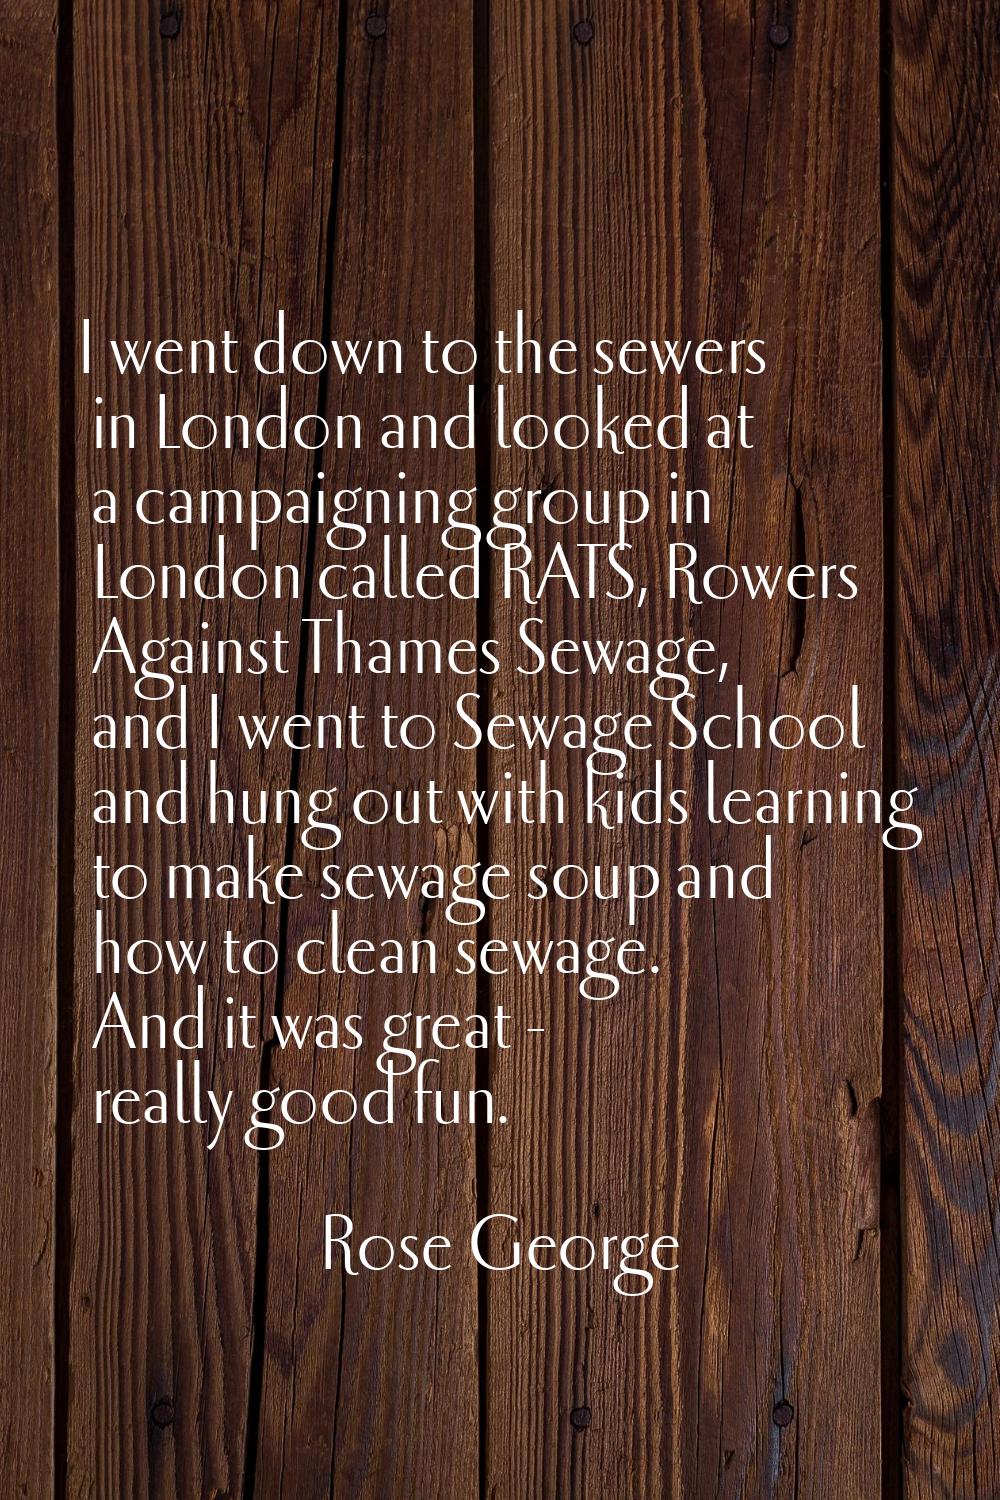 I went down to the sewers in London and looked at a campaigning group in London called RATS, Rowers